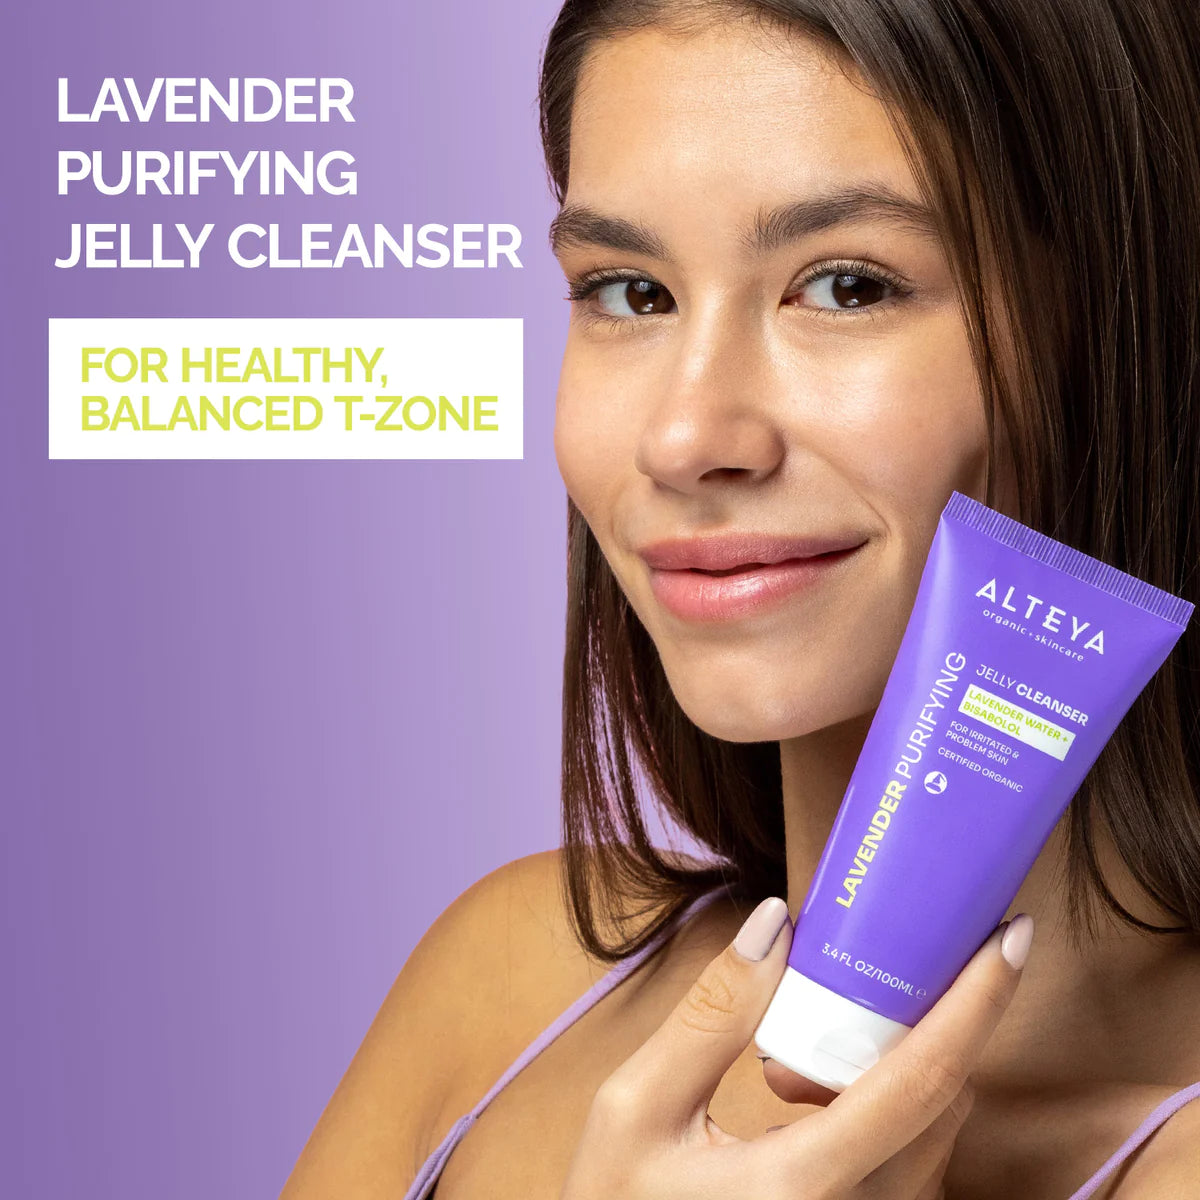 This Alteya Organics Lavender Purifying Jelly Cleanser combines the power of organic lavender water and bisabolol to effectively cleanse and purify the skin.